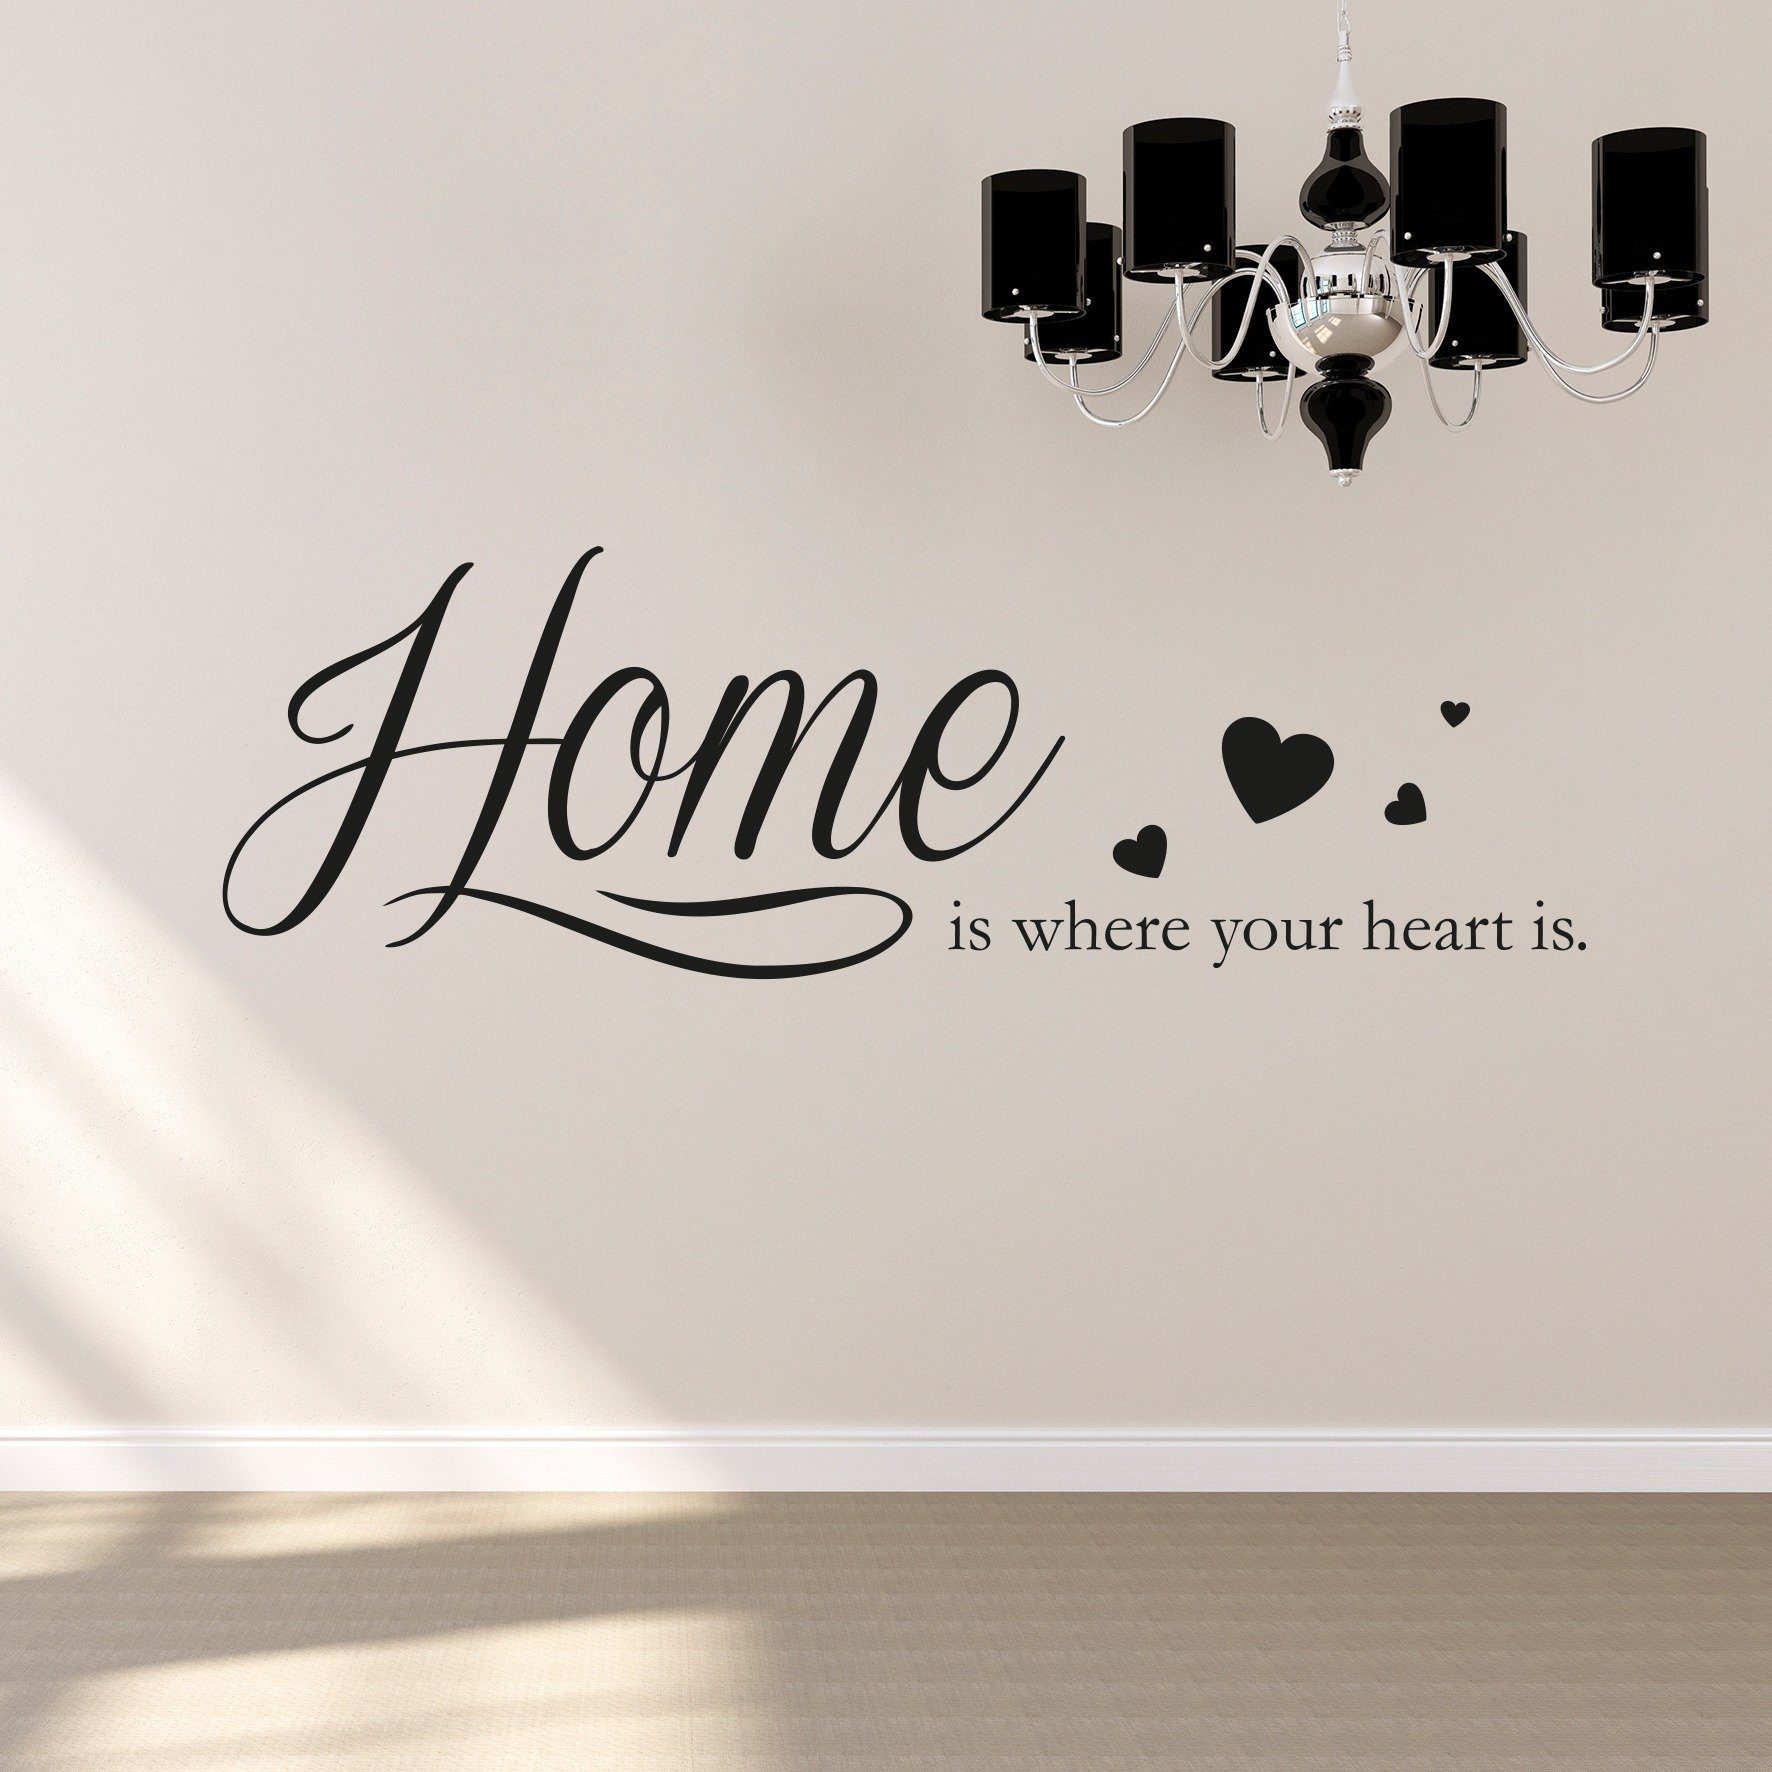 queence Wandtattoo Home is where your heart is, 120 x 30 cm